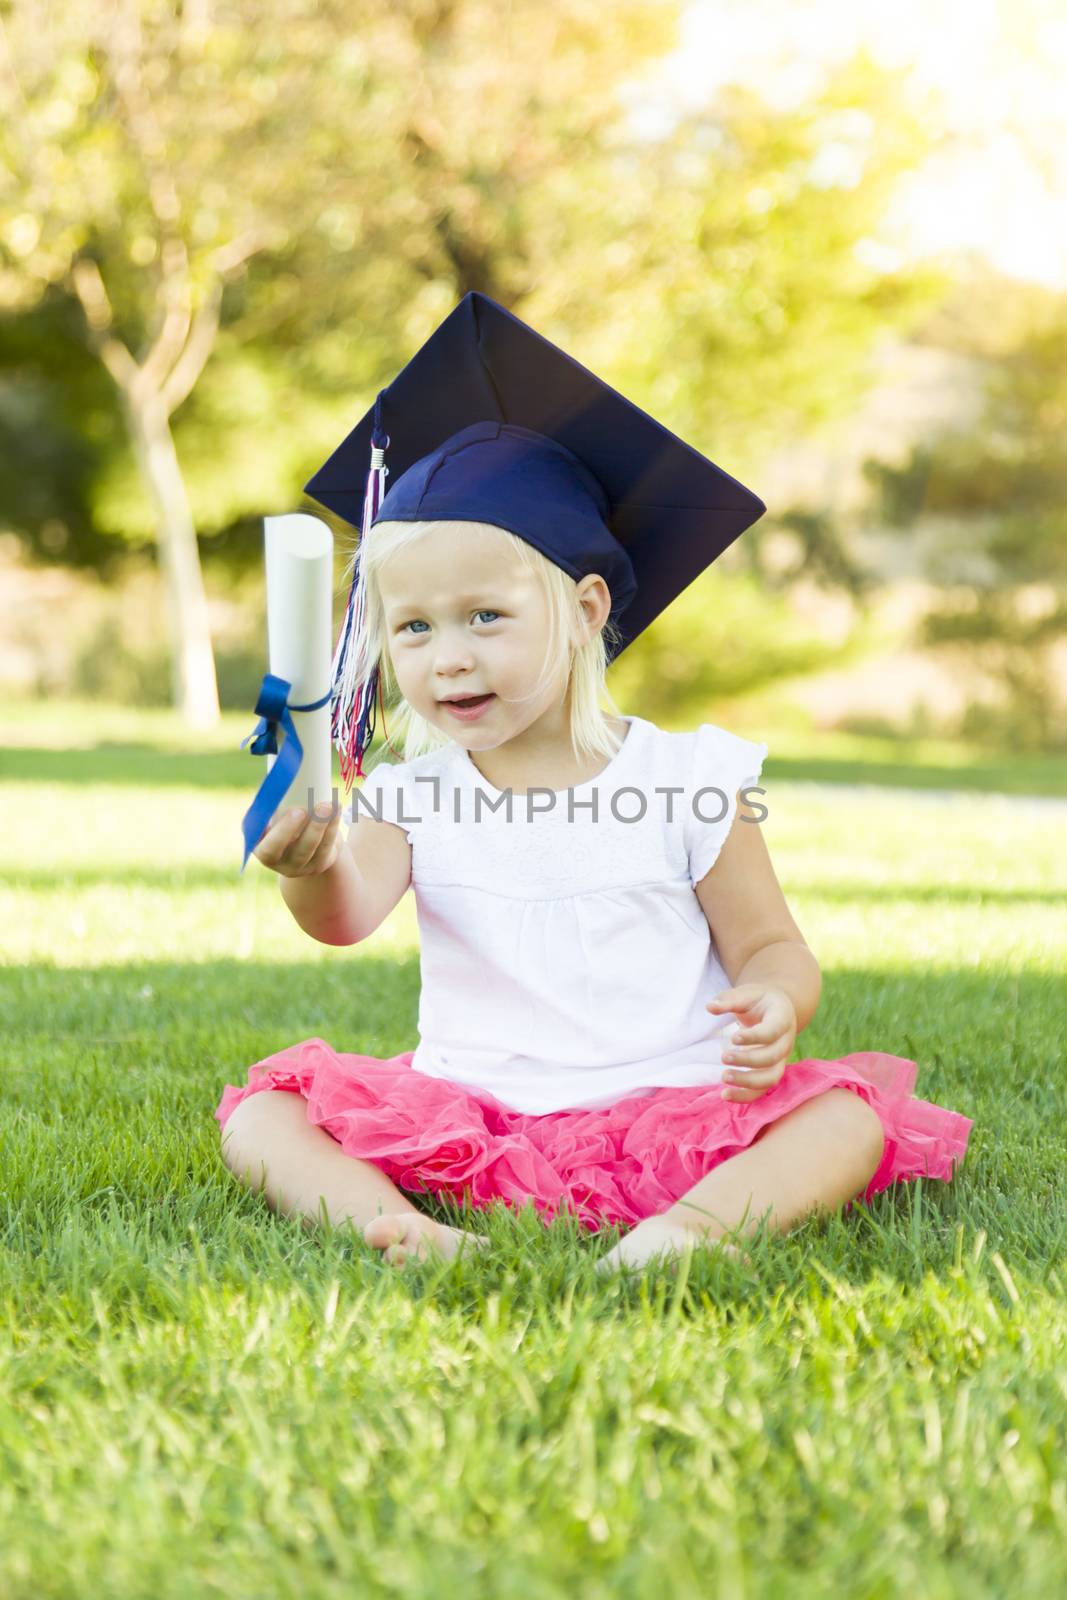 Cute Little Girl In Grass Wearing Graduation Cap Holding Diploma With Ribbon.